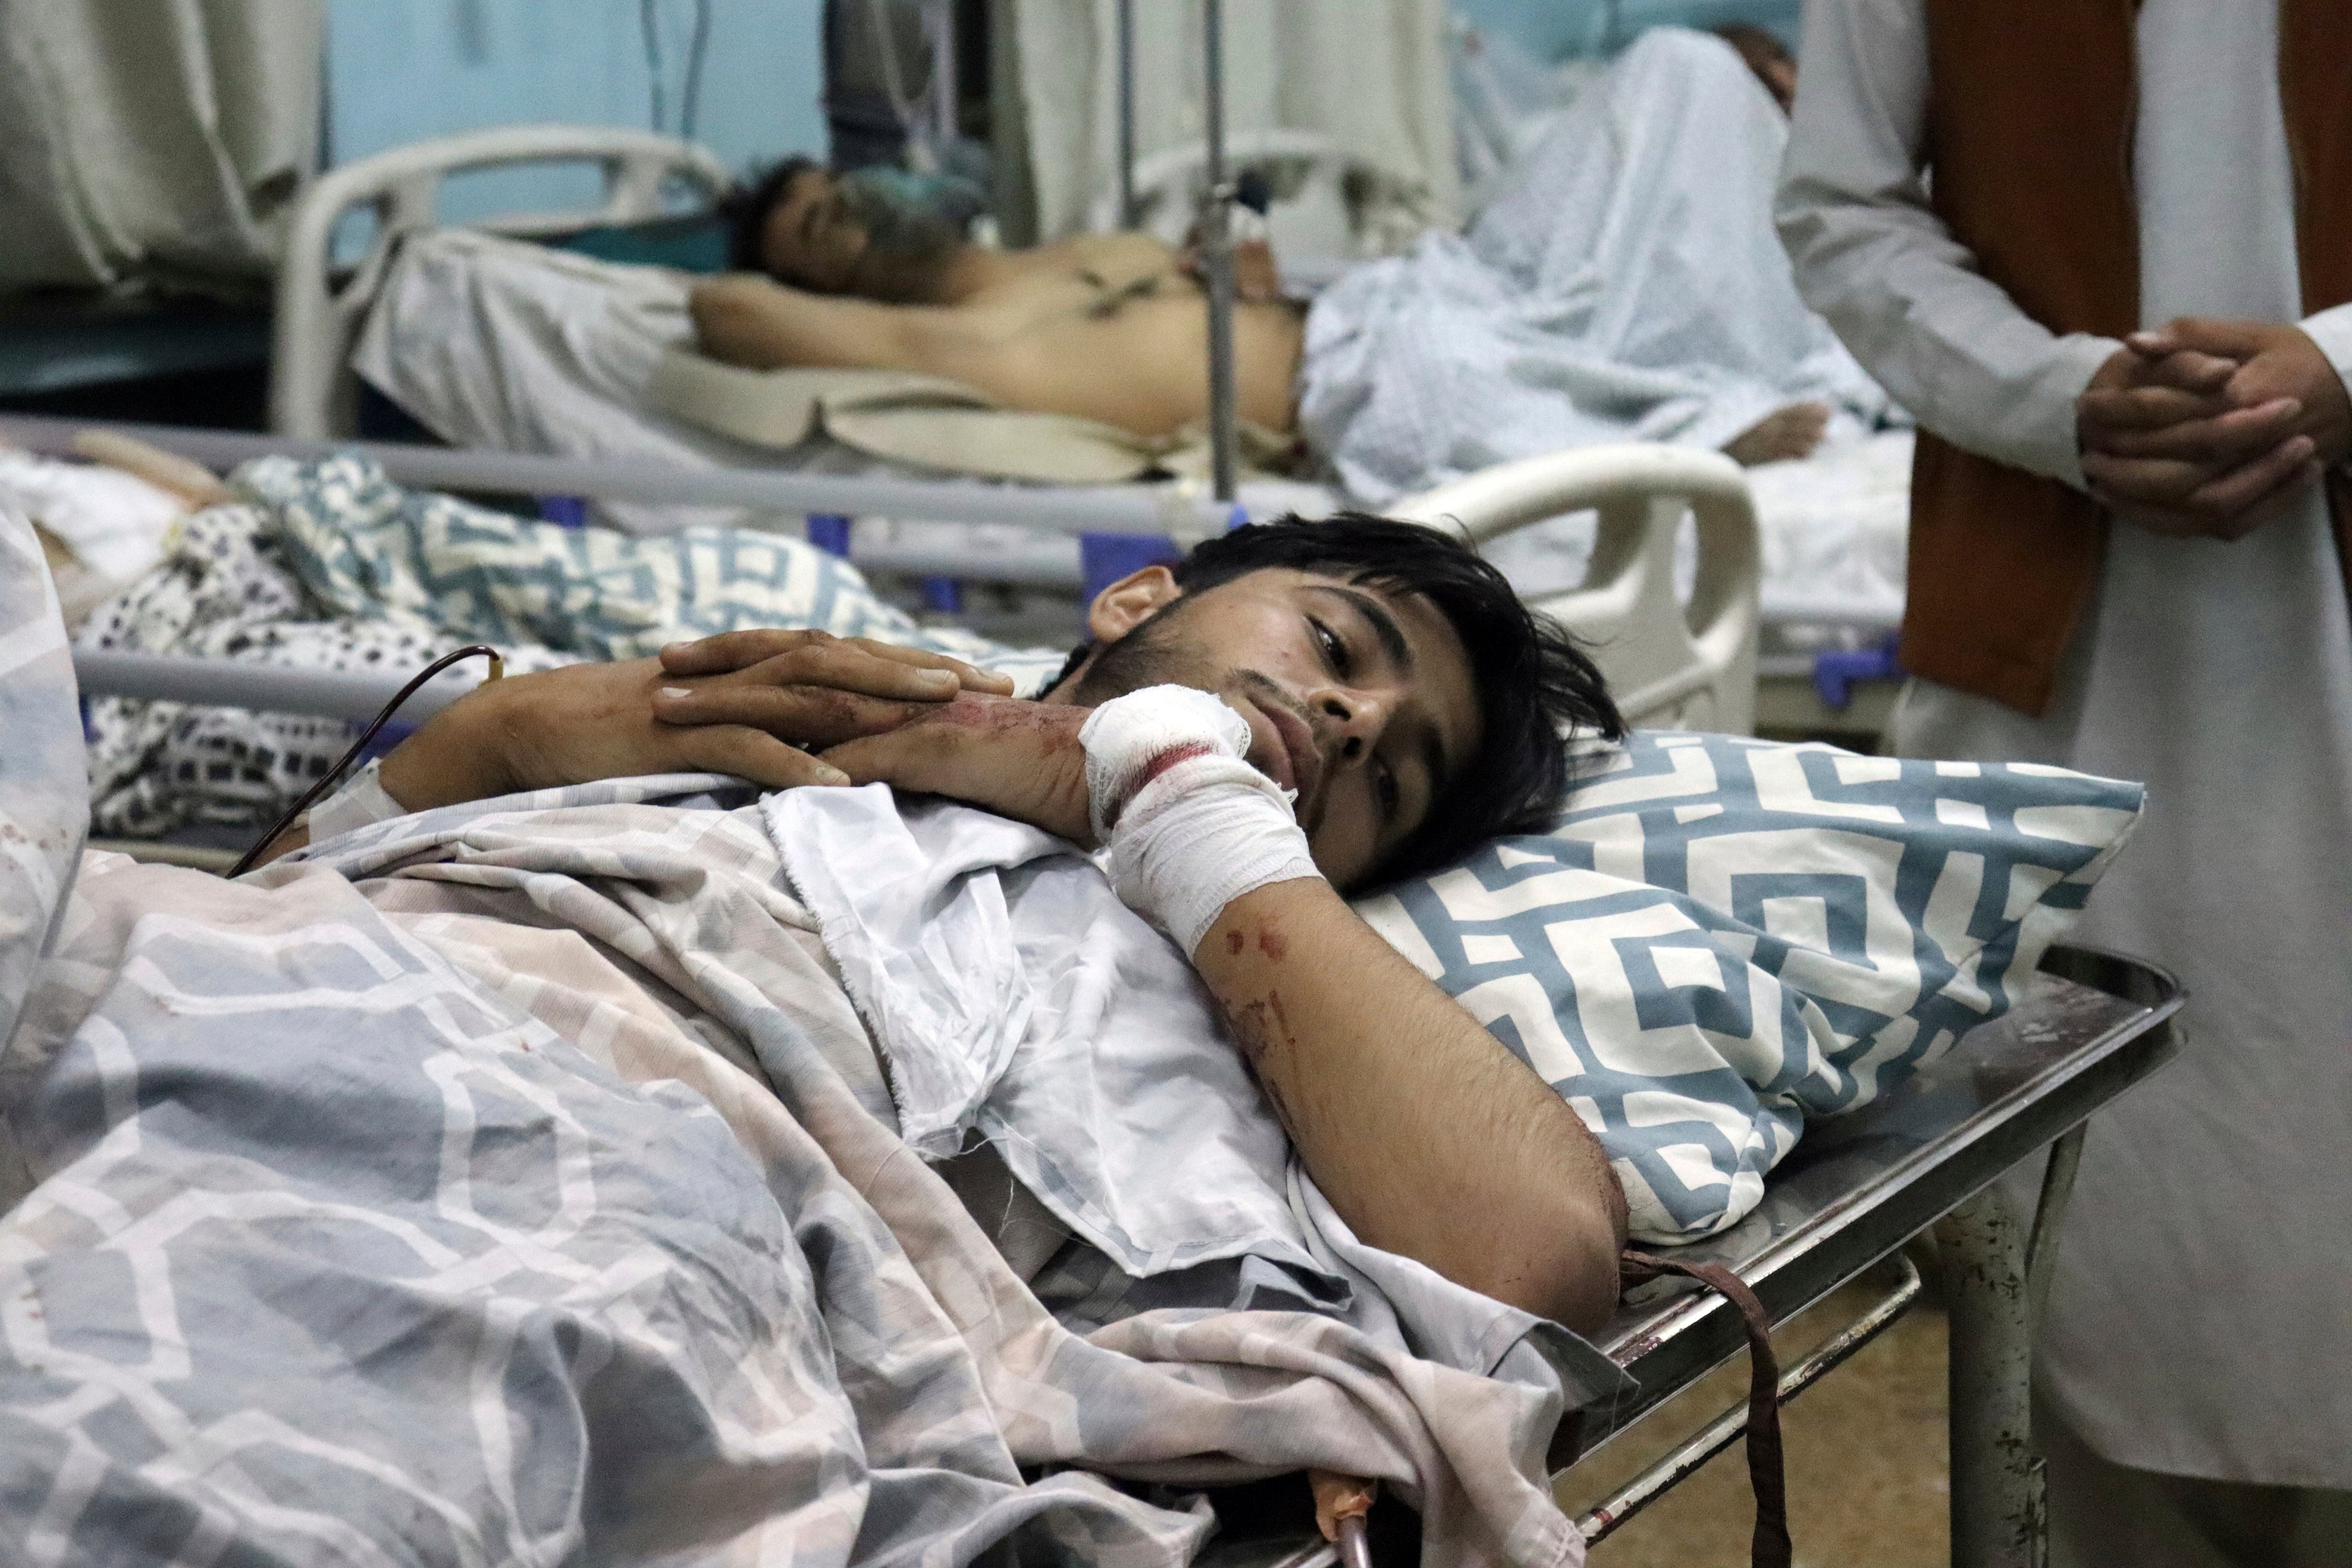 An Afghan man lies on a bed at a hospital after he was wounded in the deadly attacks outside the airport in Kabul